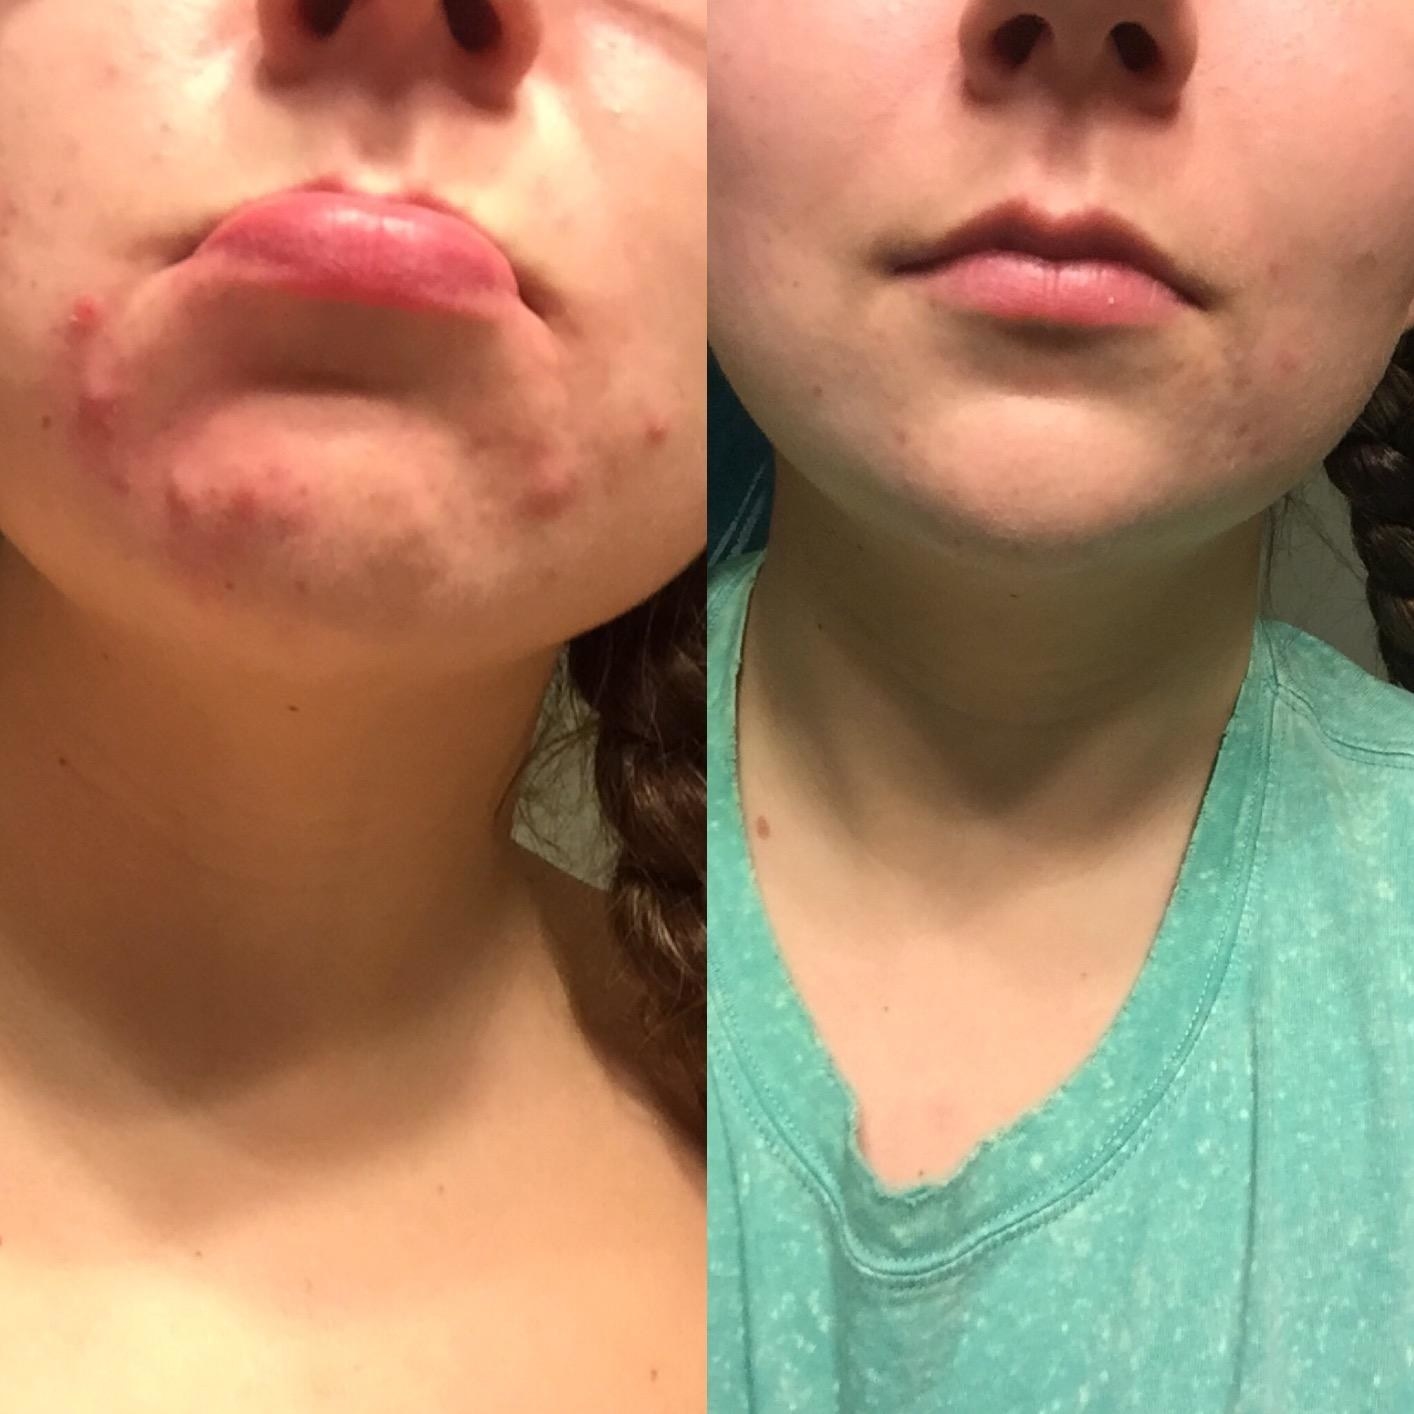 A split photo: on the left a chin with breakouts. On the right, the same chin looking nearly clear. 